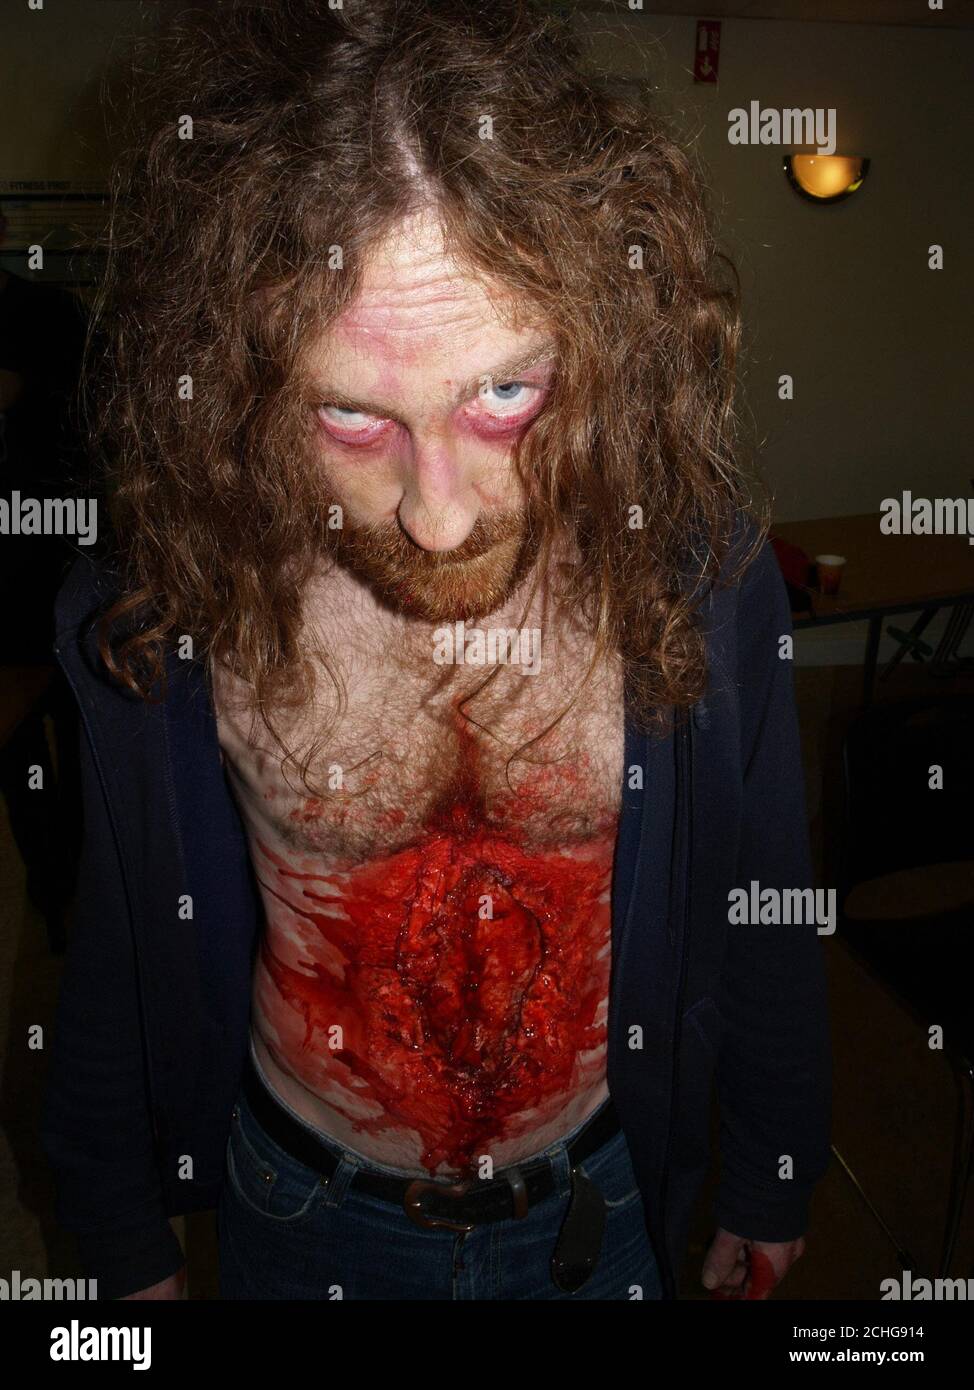 Undated publicity shot of actor John Gallagher, playing a zombie on the set of 'Battle of the Bone' in Belfast. Stock Photo